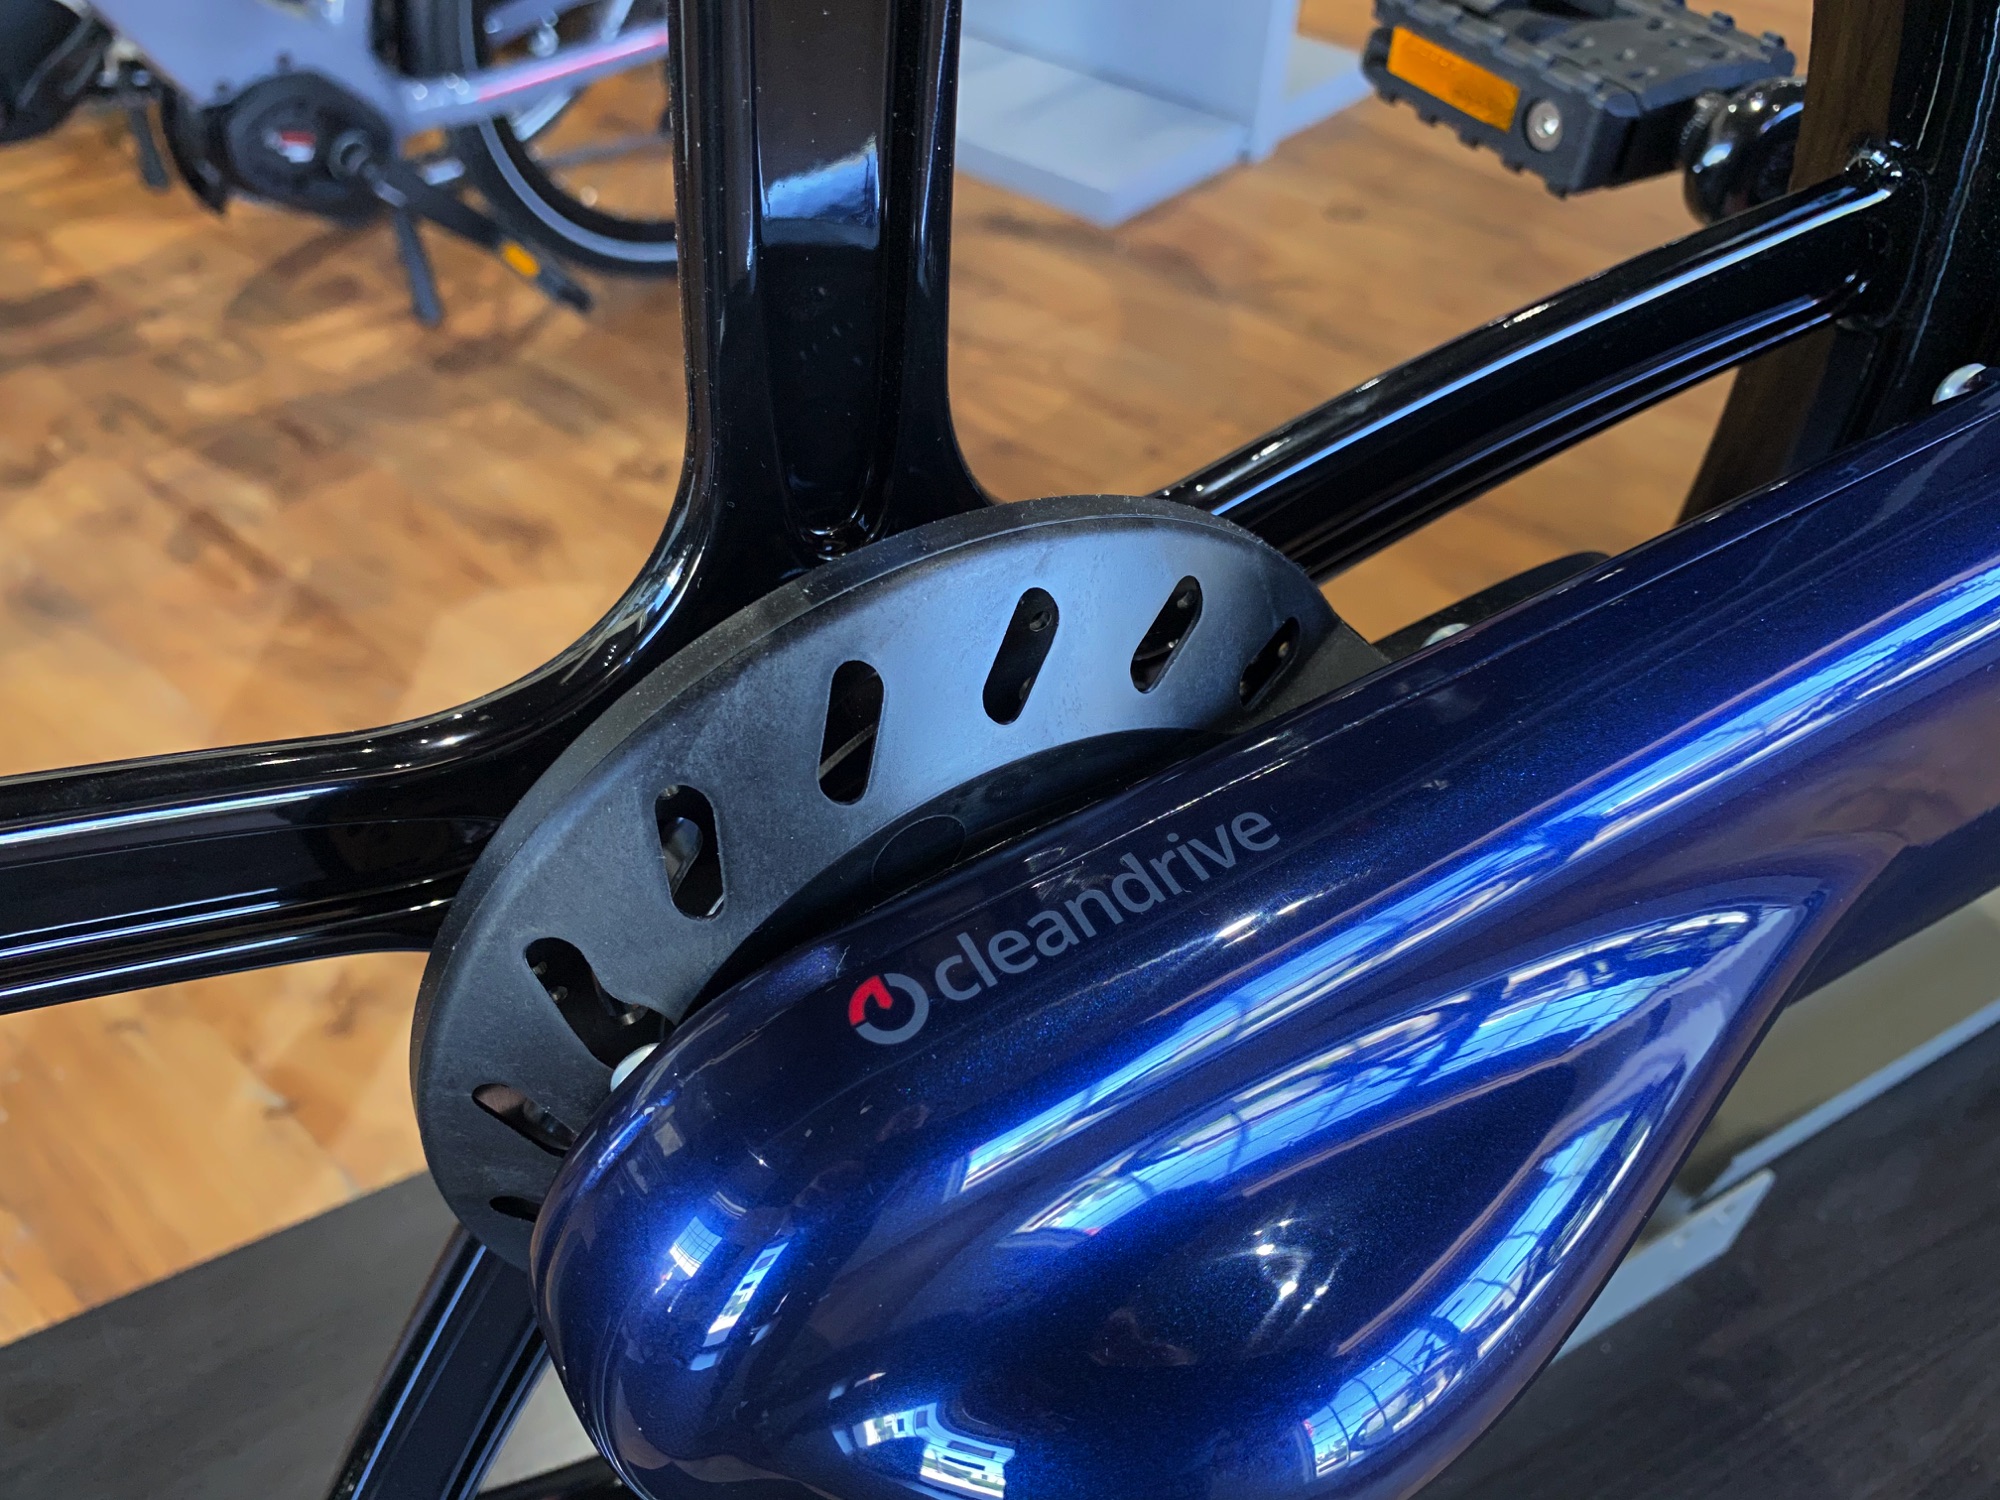 Gocycle GX electric bicycle, eBike Central, Greensboro and Charlotte NC